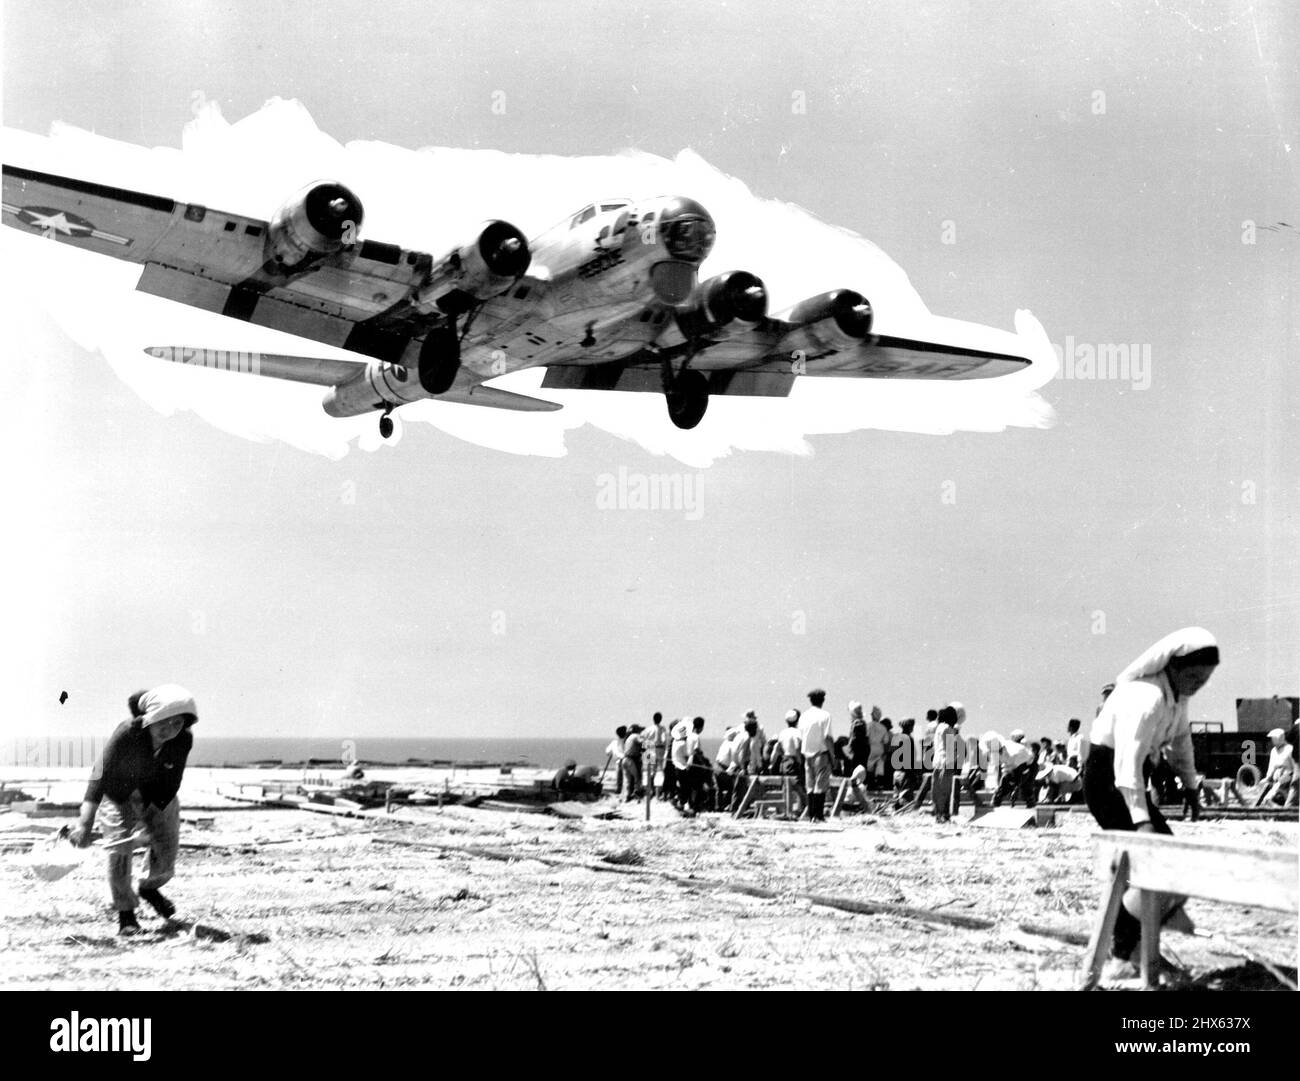 Returns From Search Mission An Airbase In Japan - A huge the Third Air Rescue Squadron roars in low over the heads of Japanese laborers who continue working with an air of complete indifference. The giant search plane makes long-range flights over the ocean between Japan and island bases when Far East Air Forces crew members have been forced to make emergency ditchings at sea. When survivors are located, the SB-29 is capable of launching a 12-man life boat, complete with survival gear for a two Stock Photo